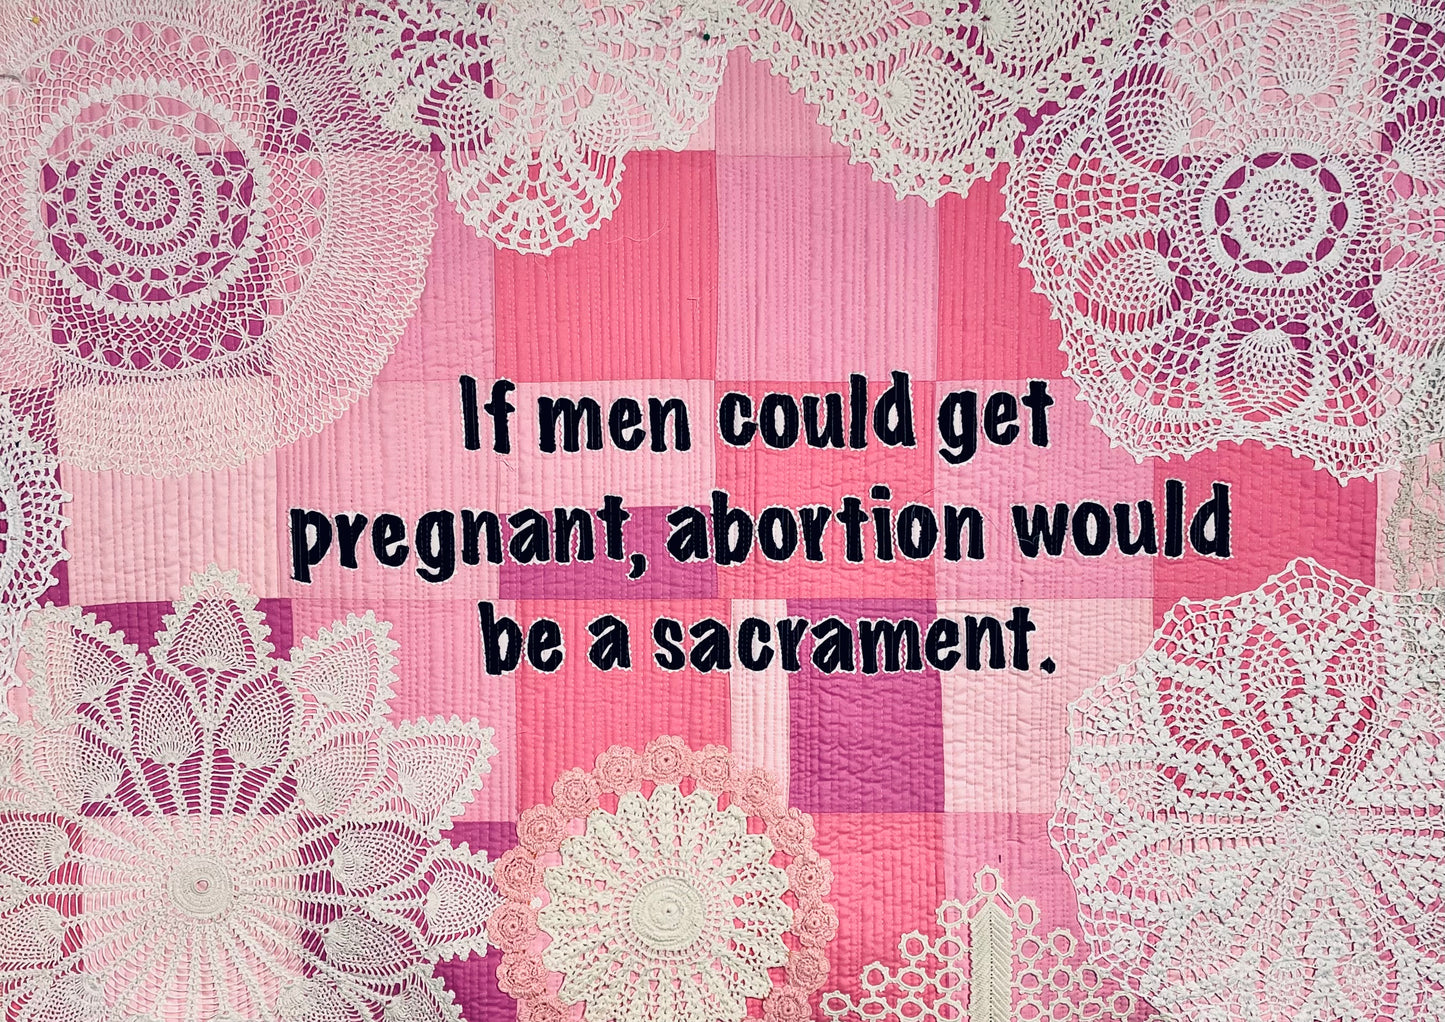 Women’s Work Abortion Rights Series: If men could get pregnant